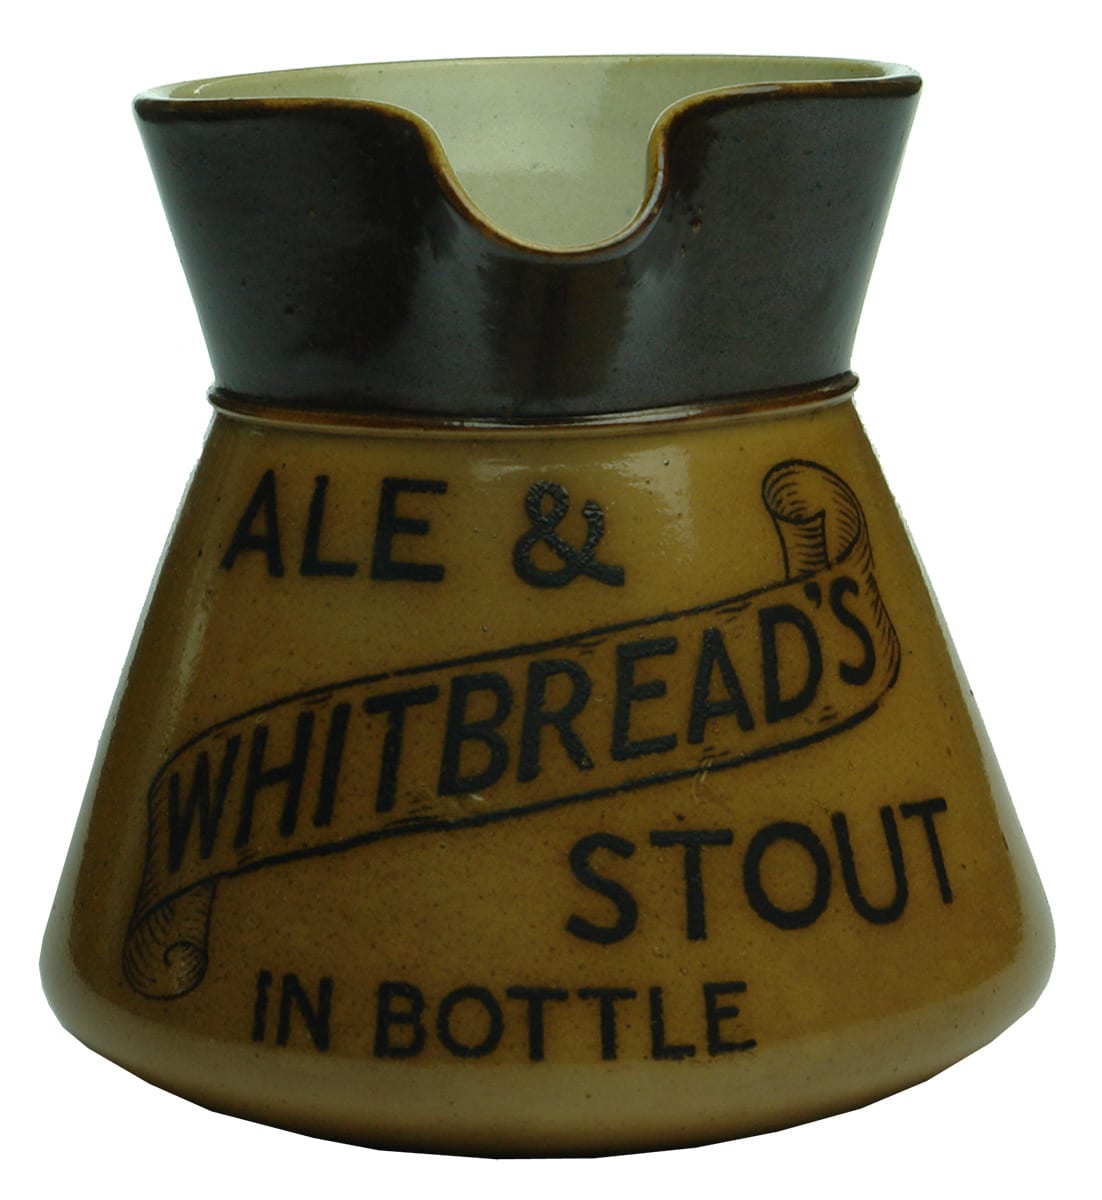 Whitbread's Ale Stout Advertising Water Jug